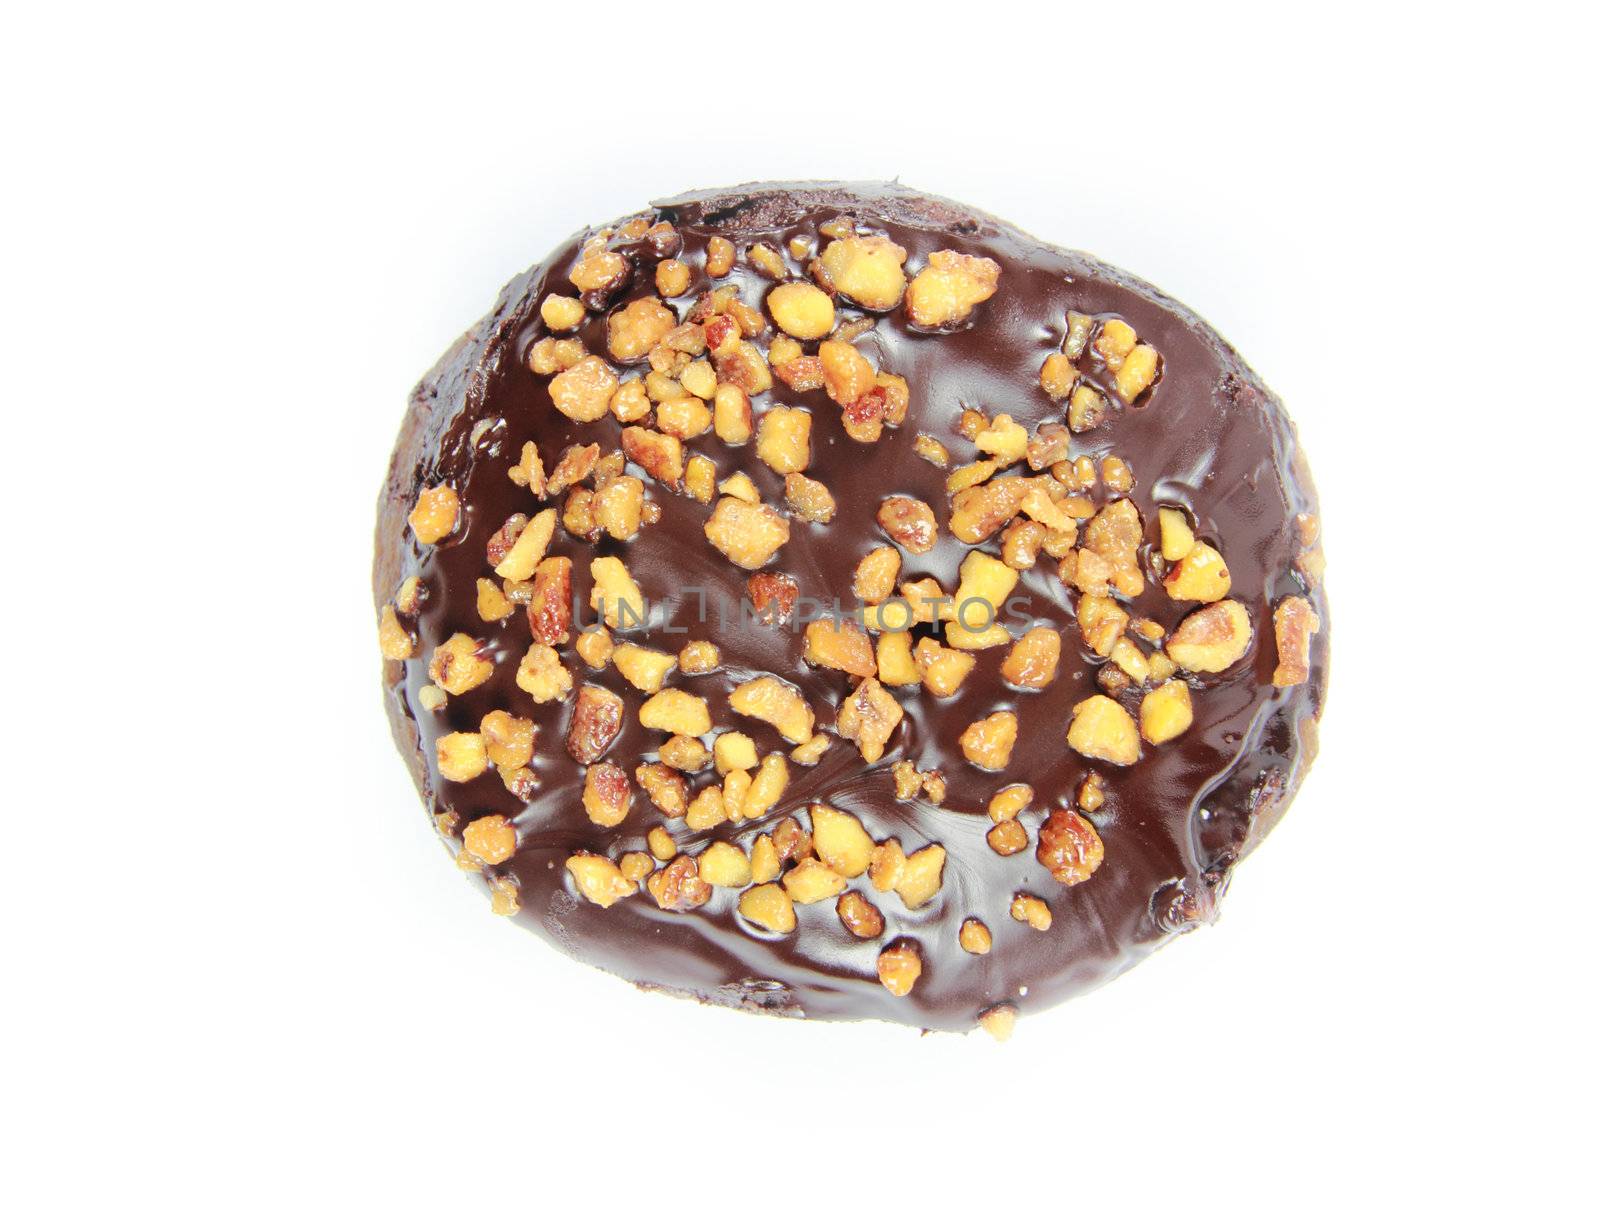  Chocolate Donuts on white background